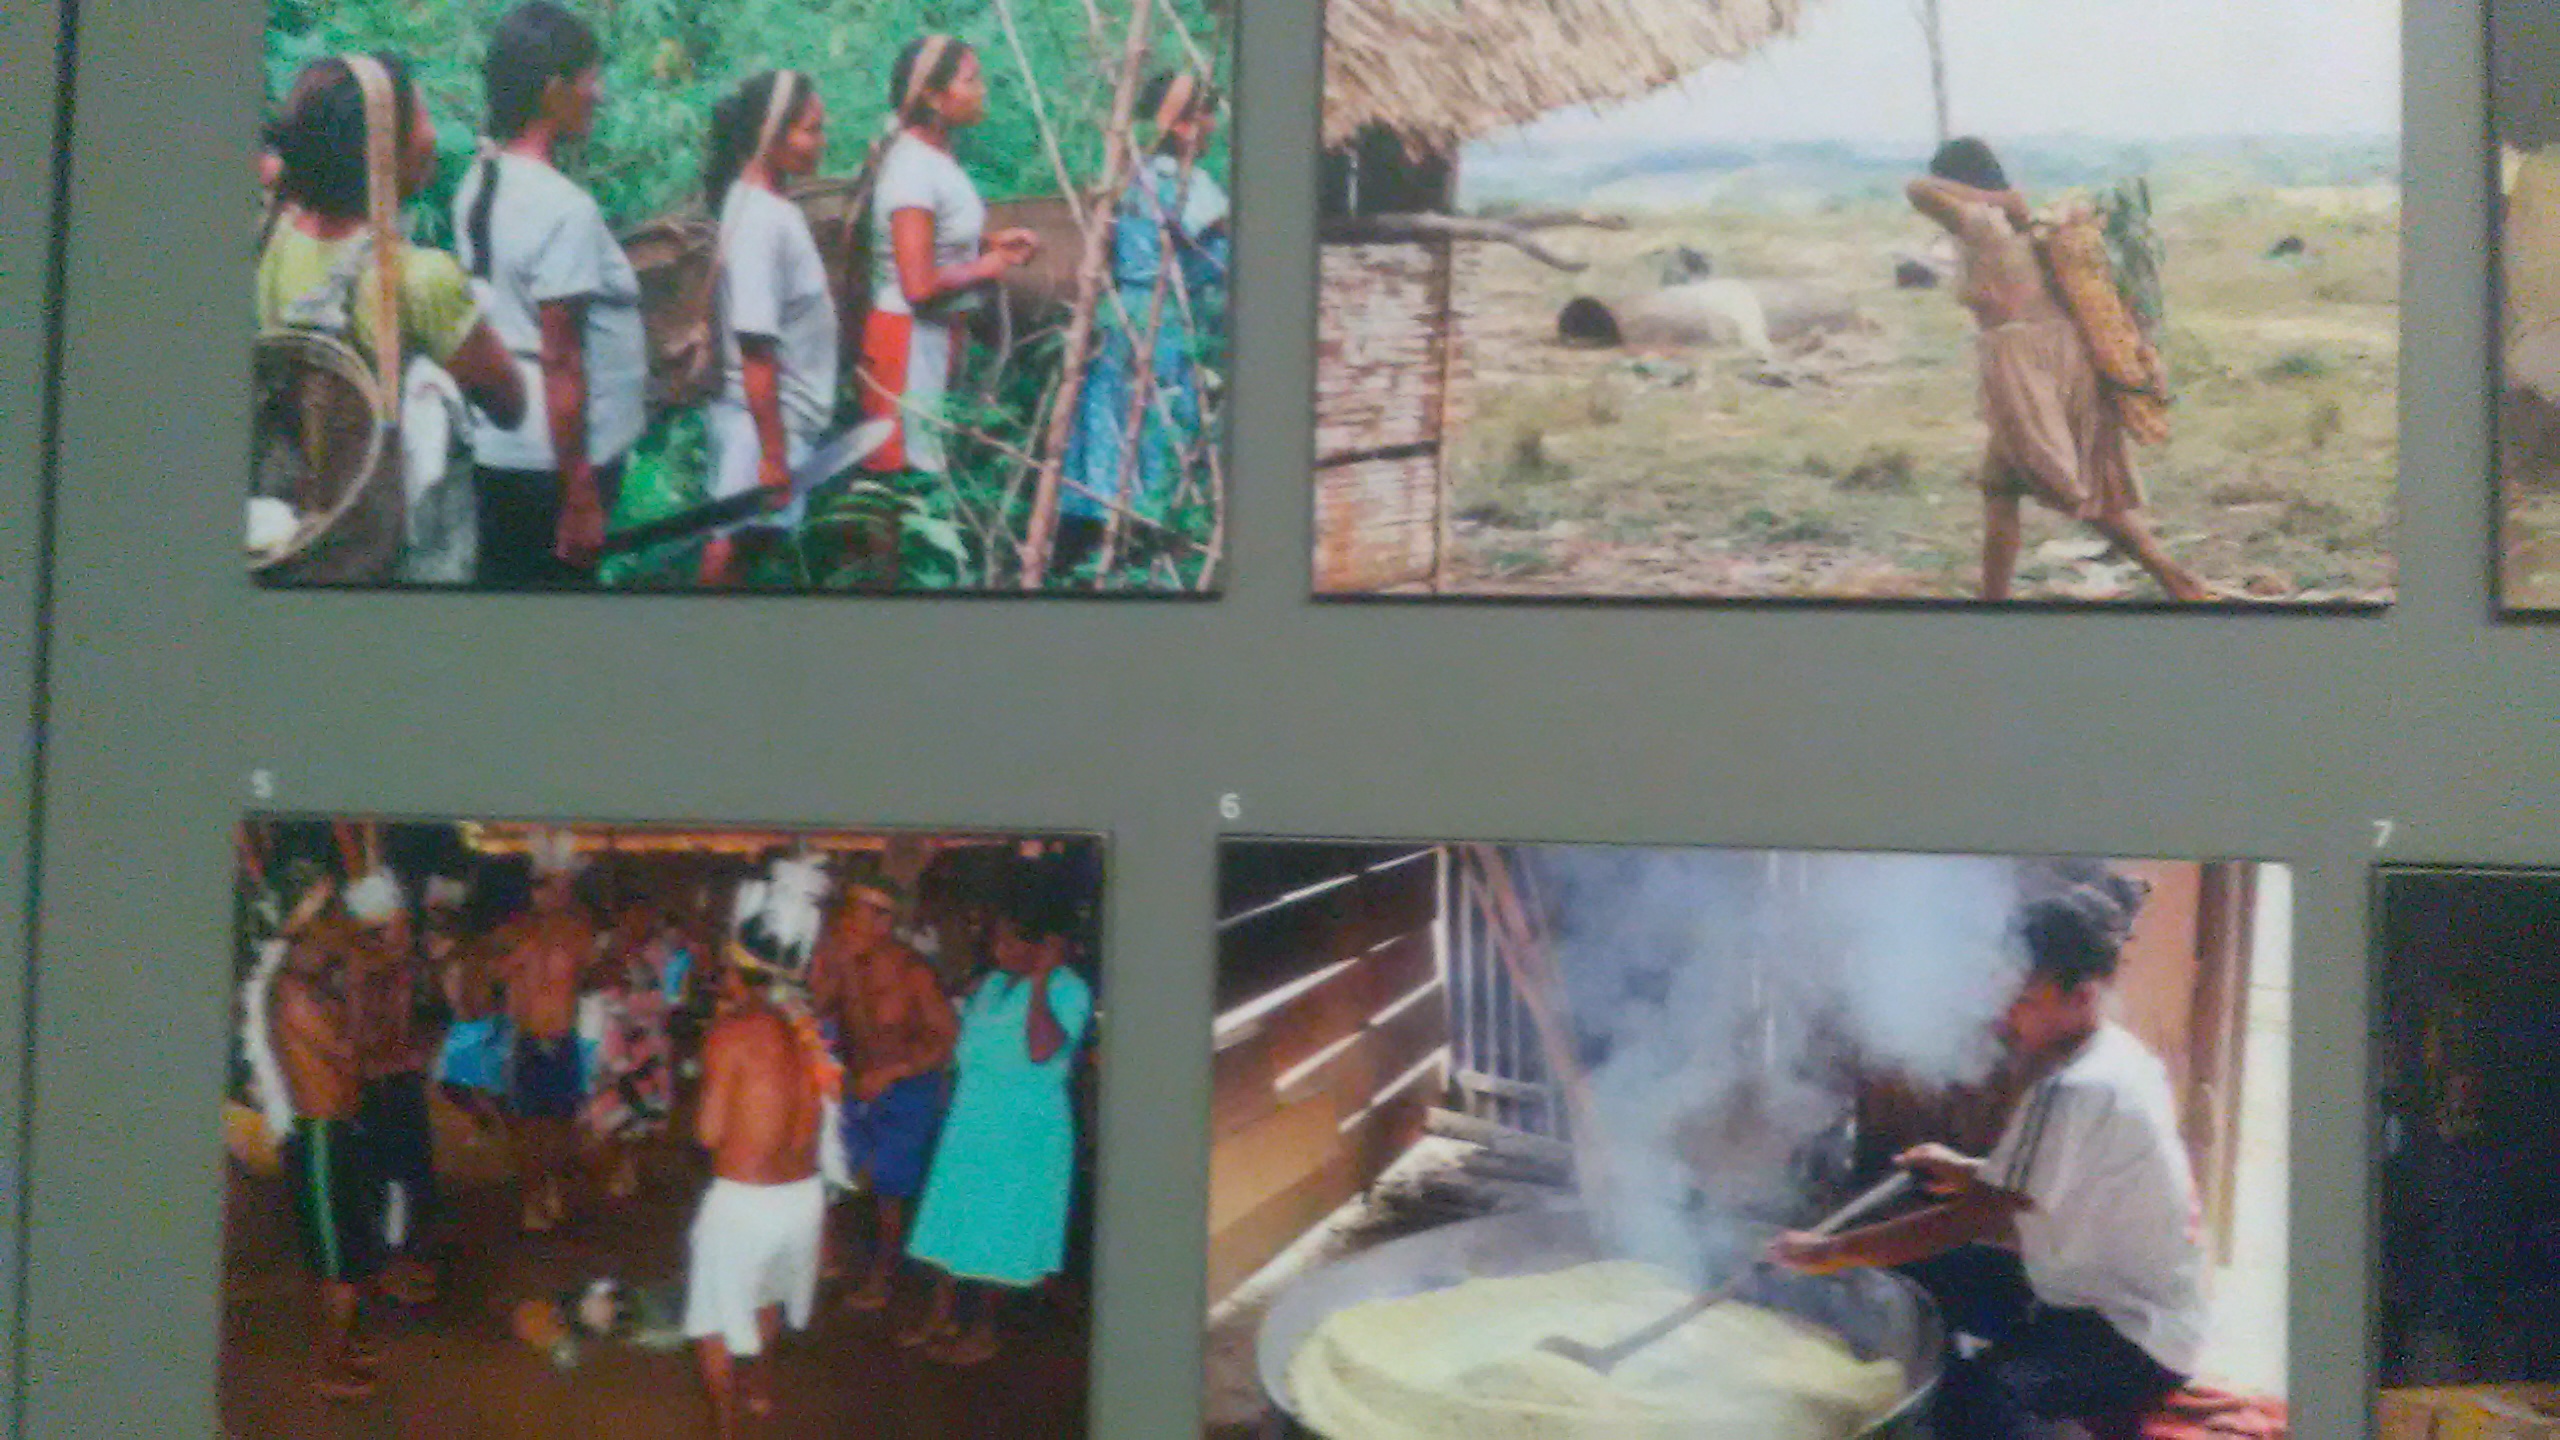 Image of indigenous lives in Bogotá's Museo Nacional